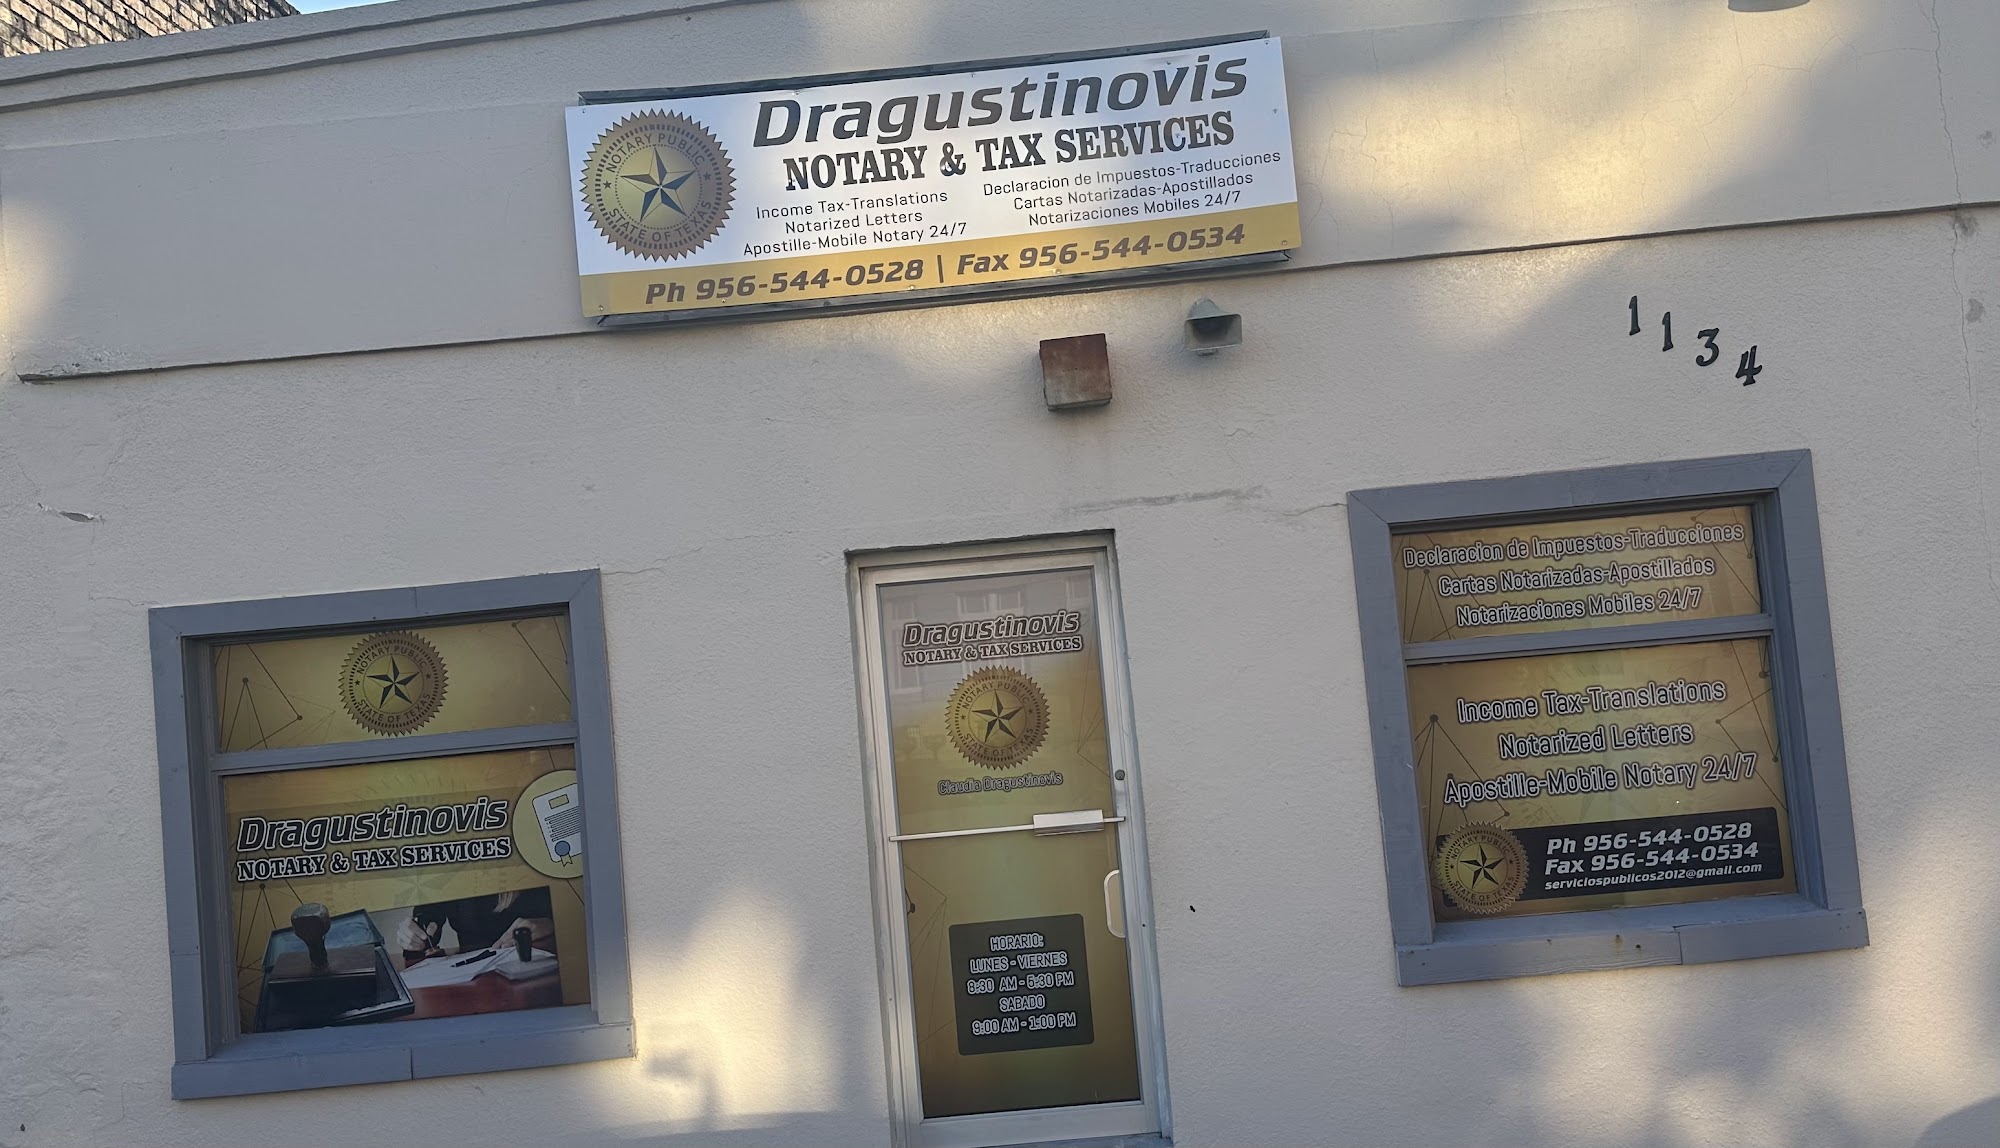 Dragustinovis Notary & Tax Services